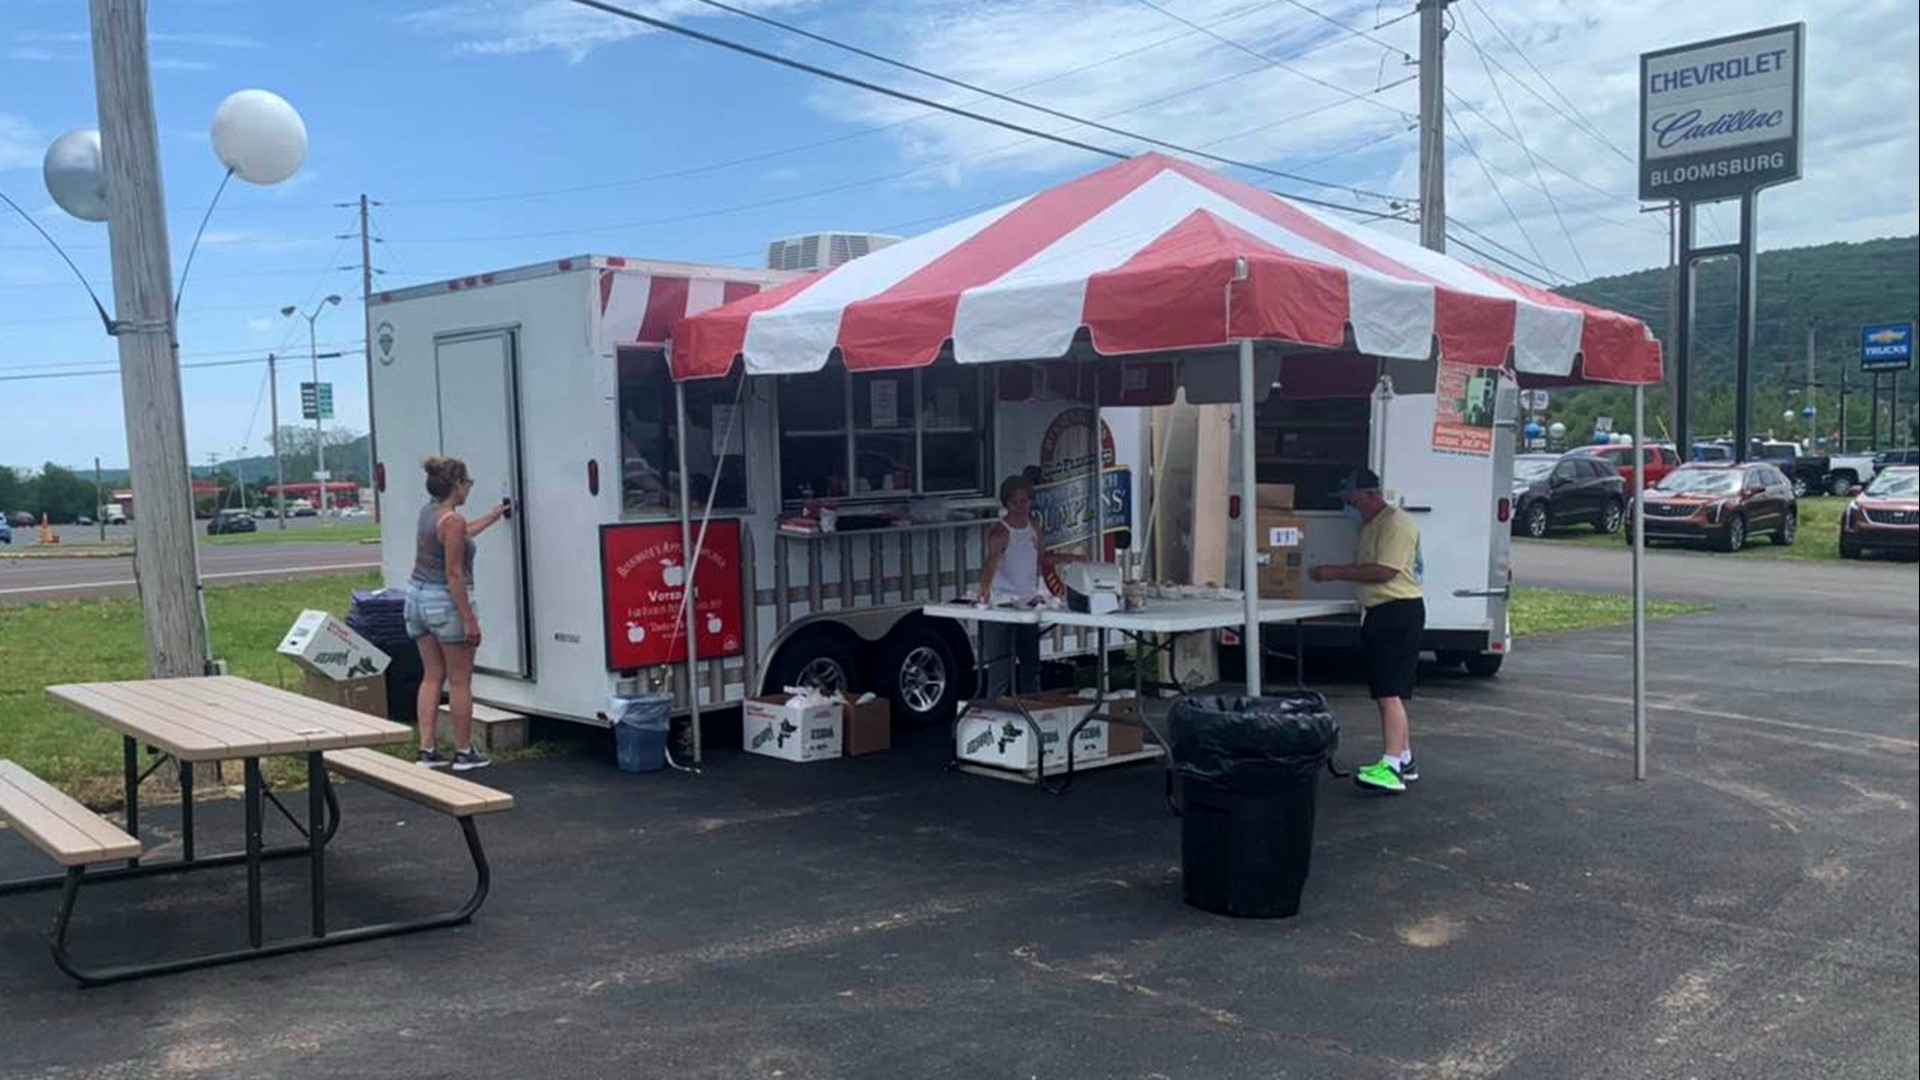 Vendors are setting up outside of local businesses around the state bringing fair food to the communities.